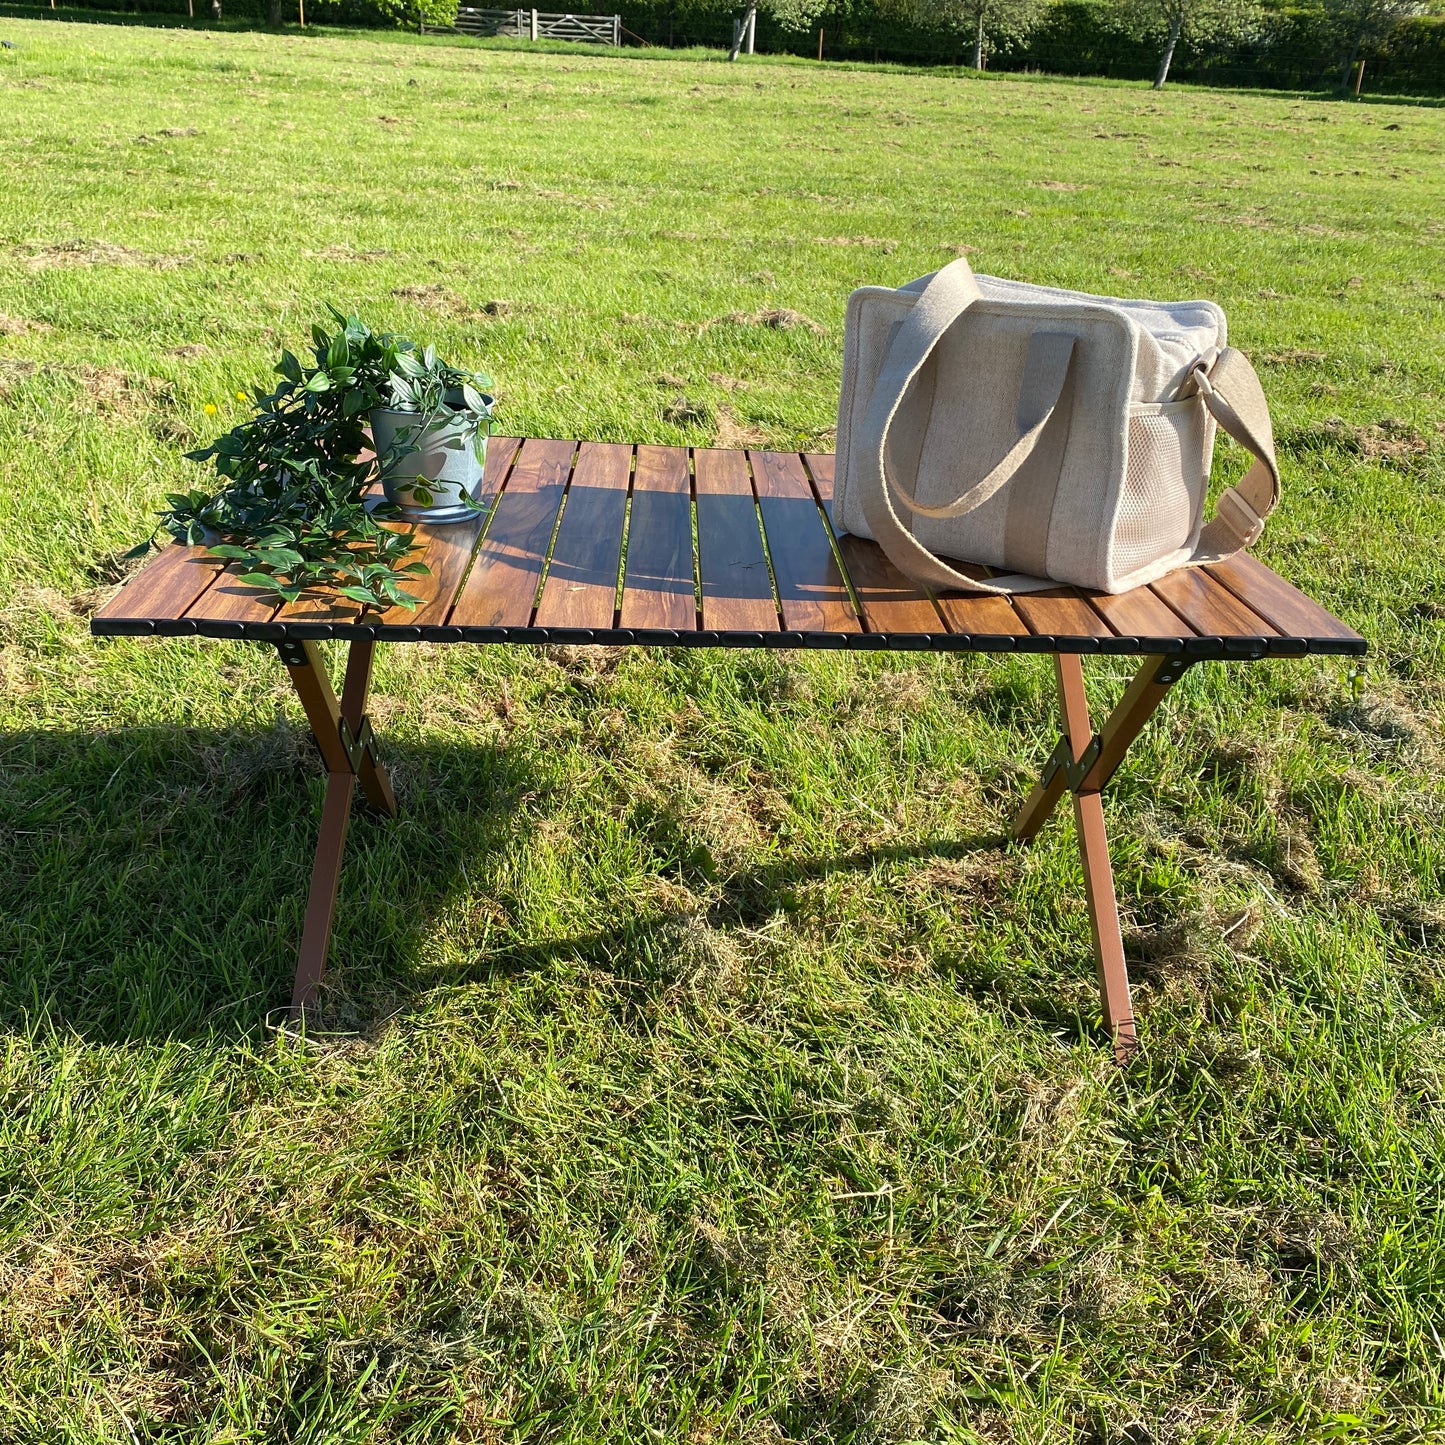 A lightweight, foldable, portable picnic table by The Well Heeled Hippy. Perfect for camping, glamping and picnicing